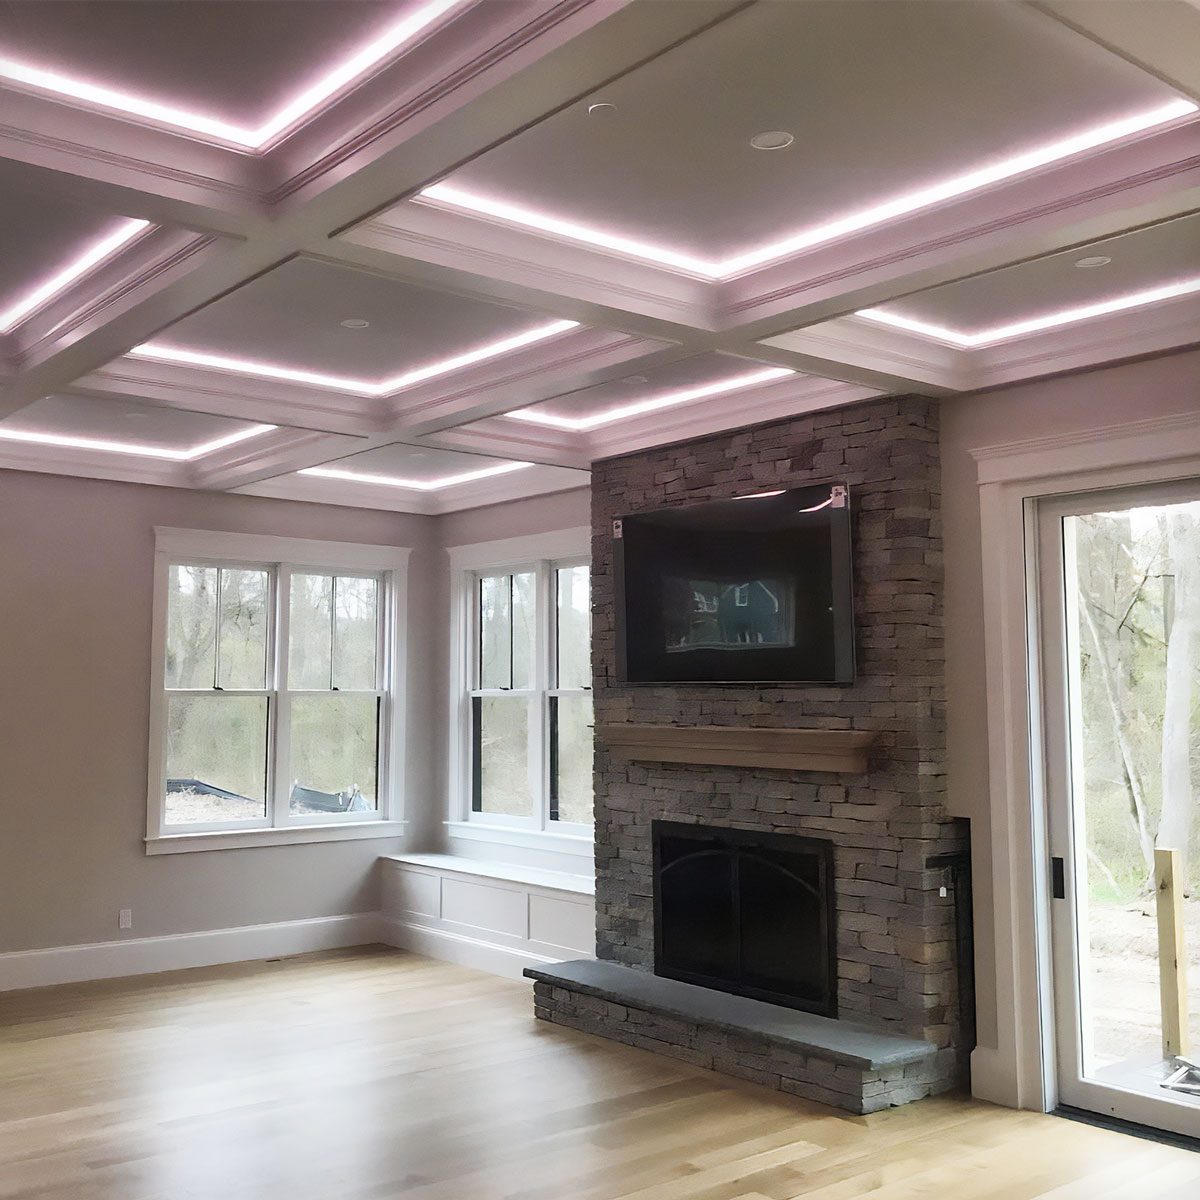 Led Coffered Ceiling